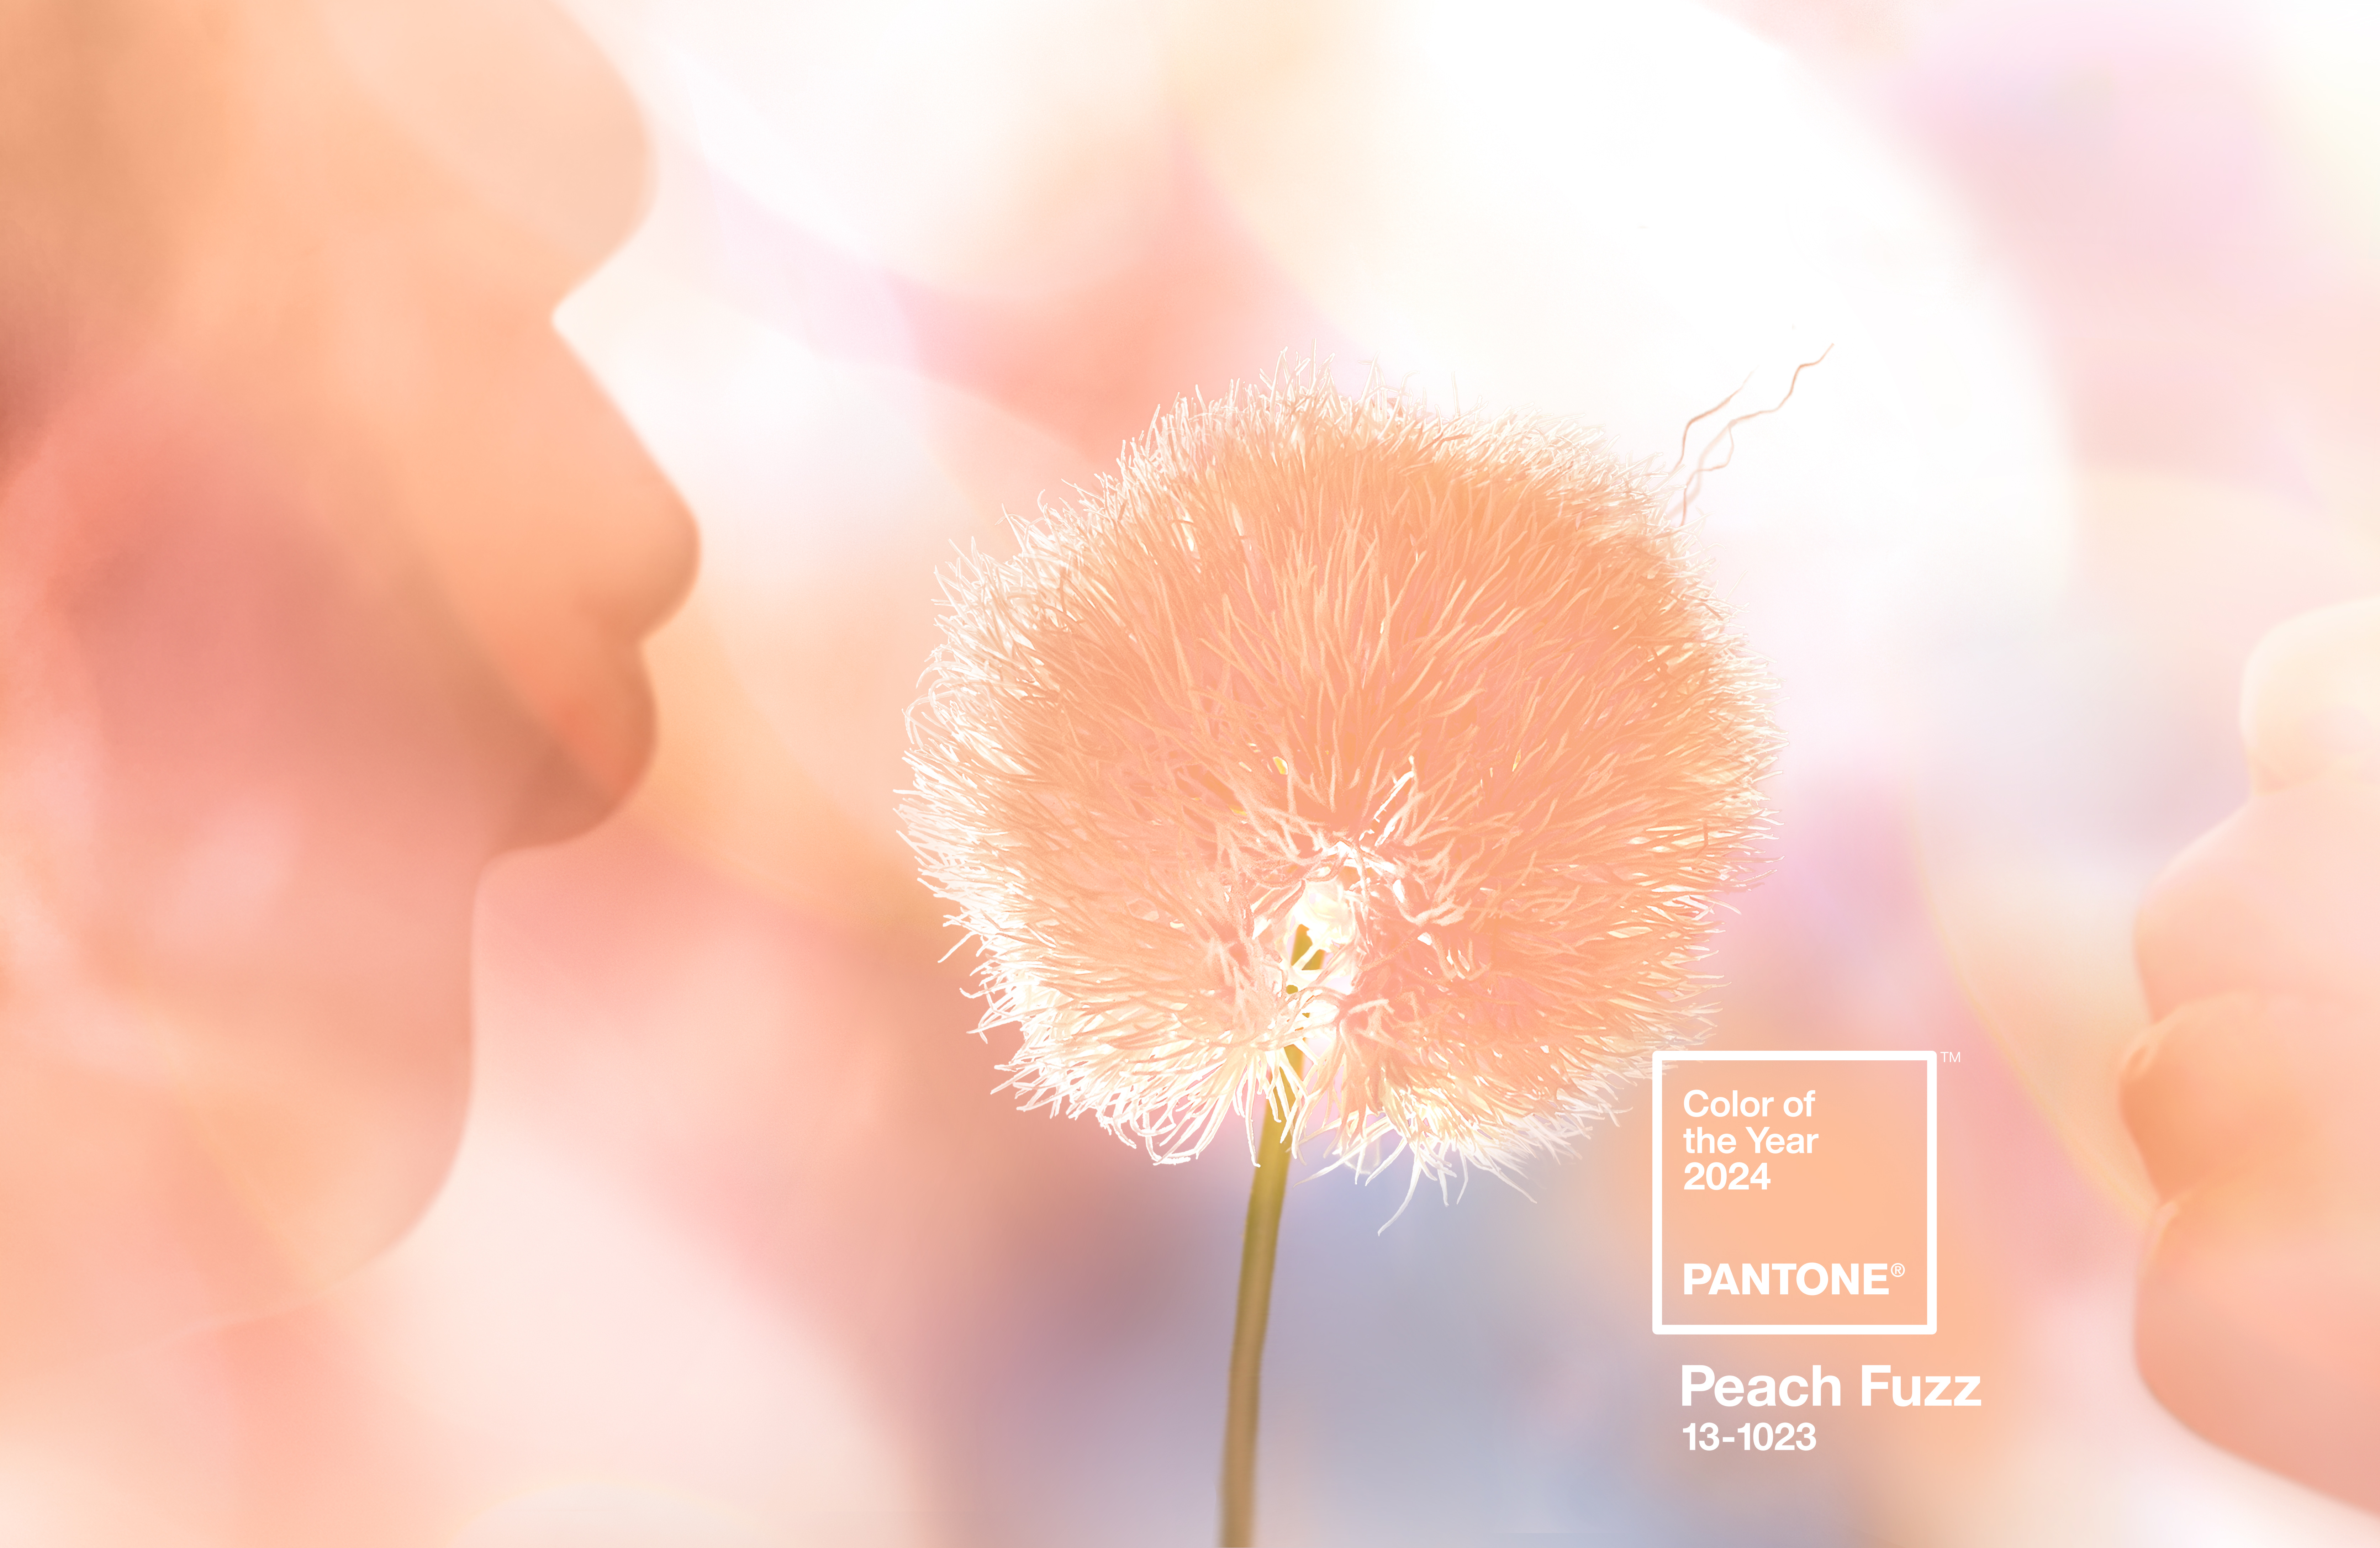 Pantone’s 2024 Color of the Year Symbolizes Human Compassion and Connection